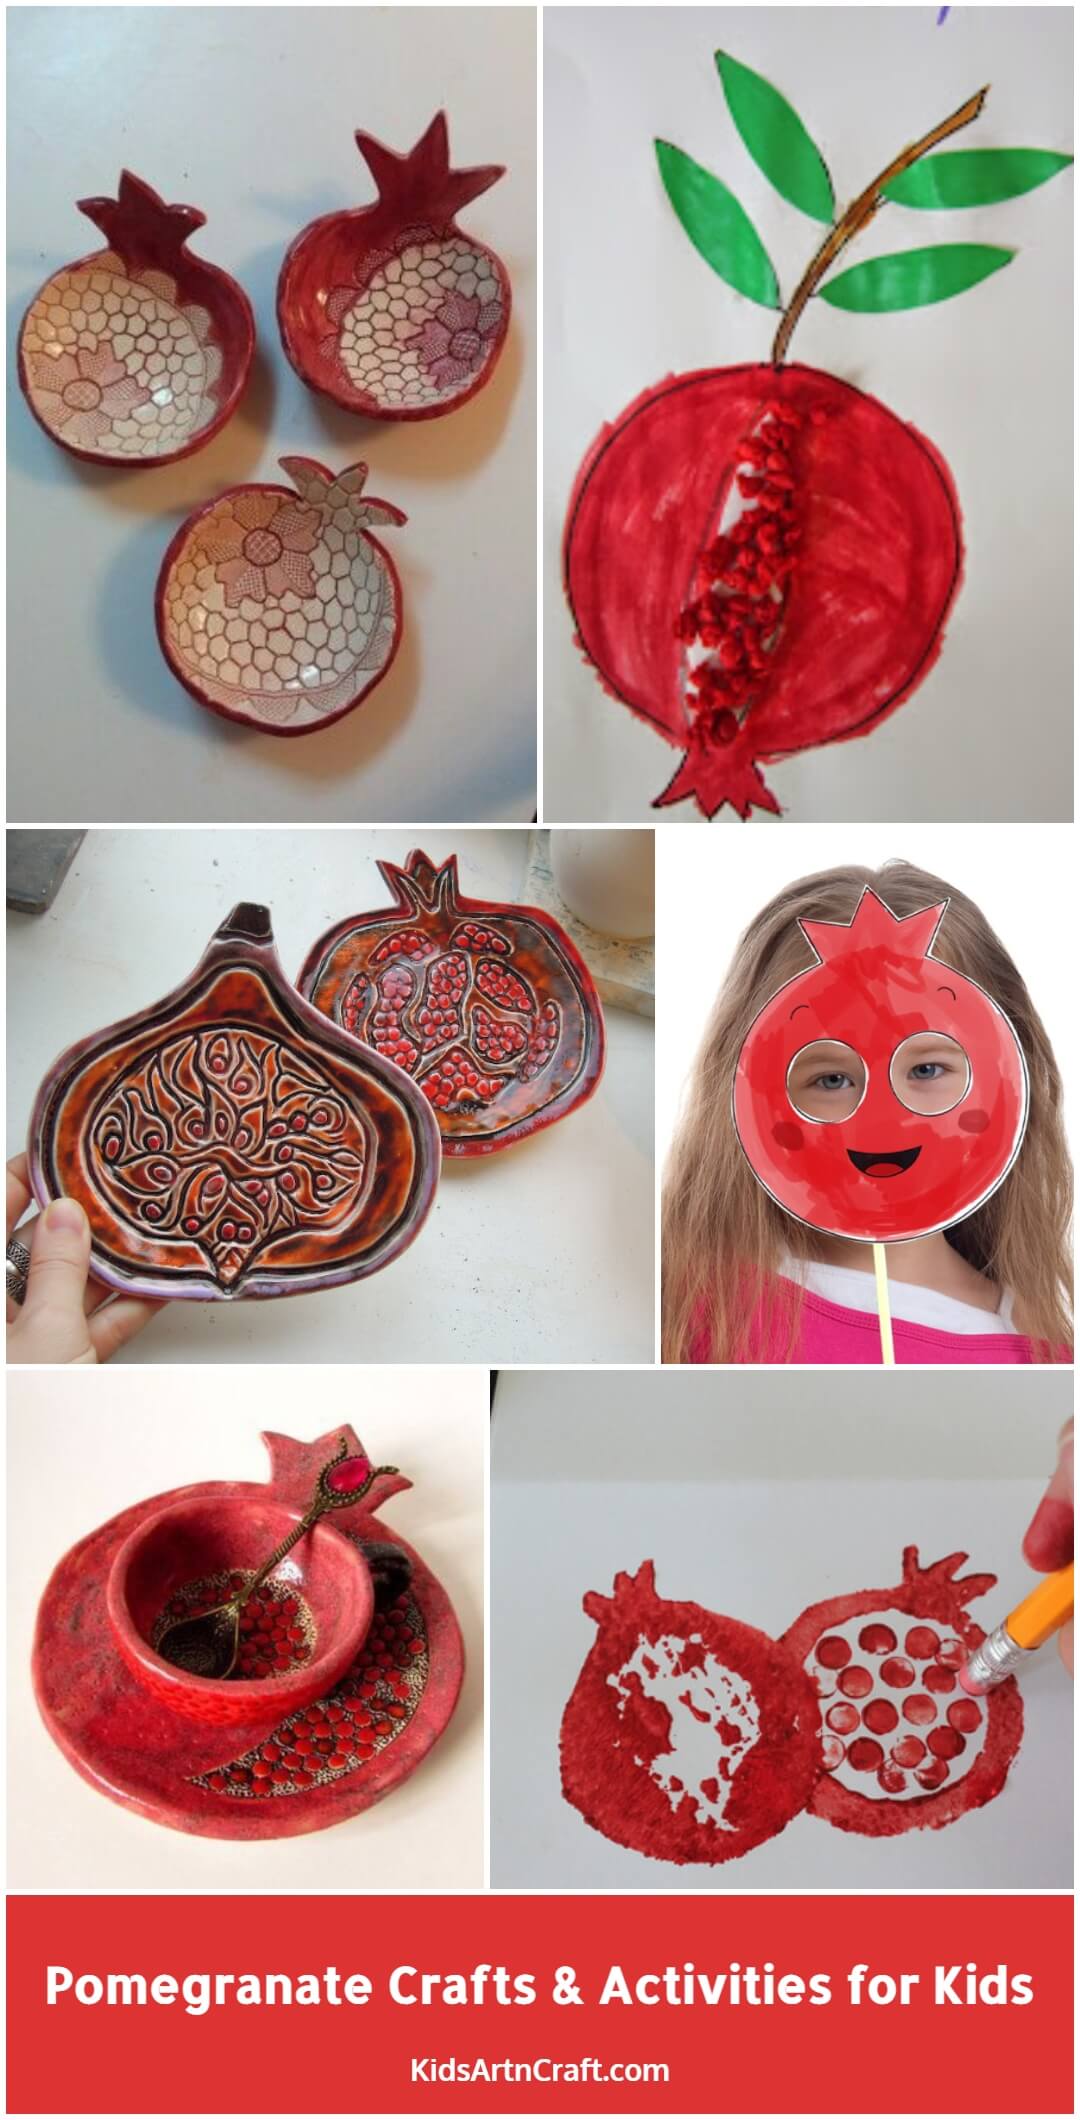 Pomegranate Crafts & Activities for Kids